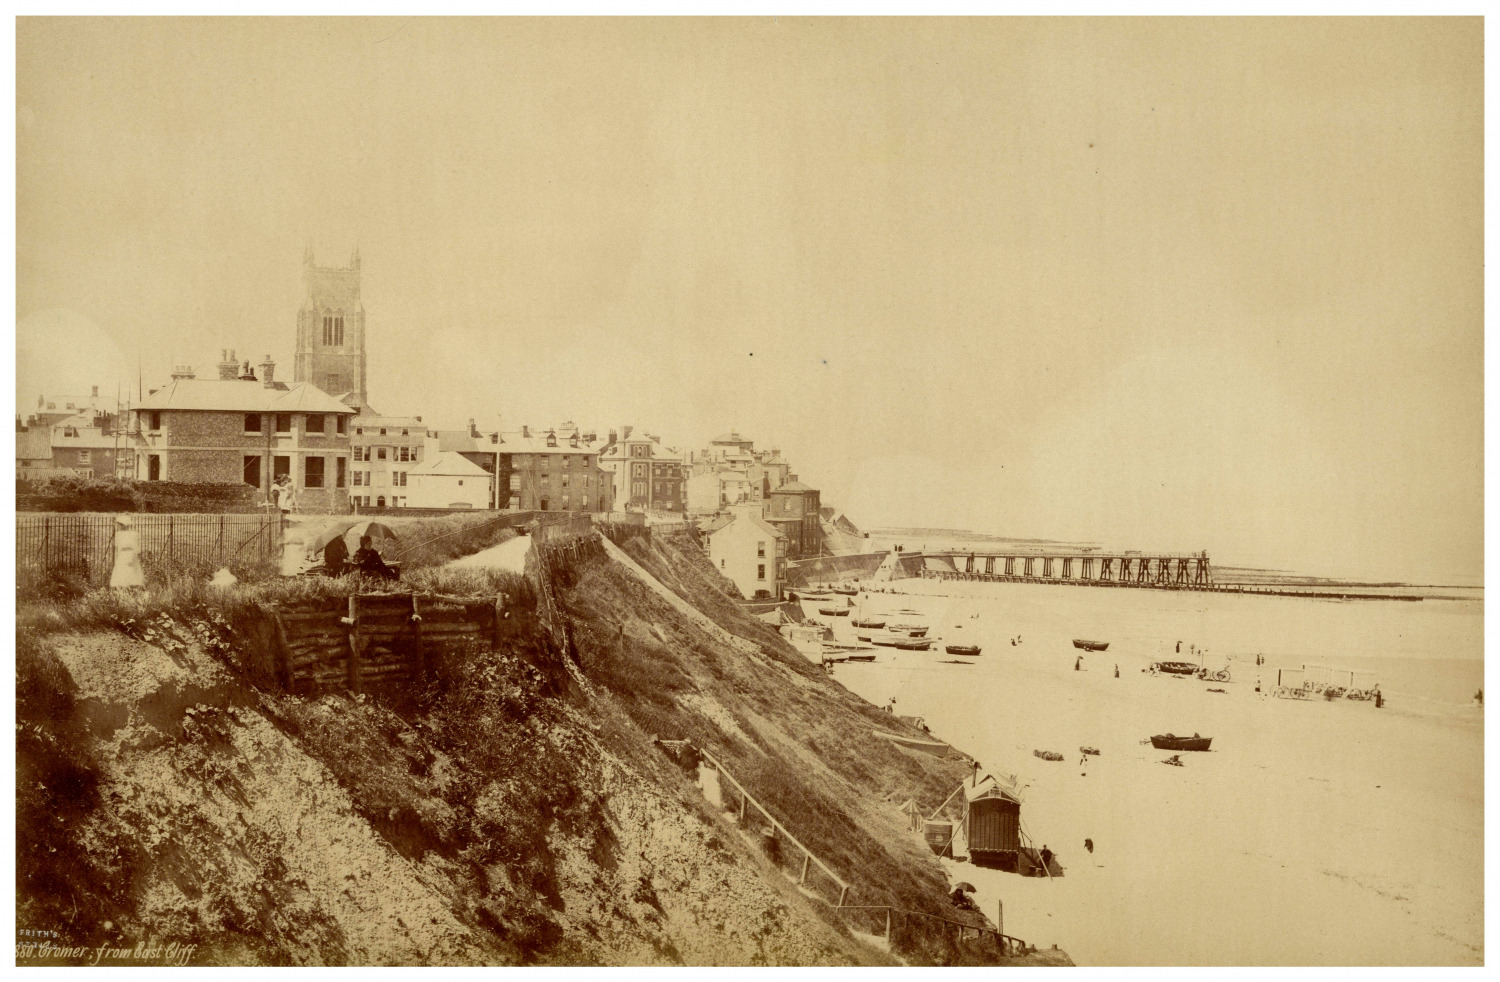 Francis Frith, Cromer from East Cliff Vintage Albumen Print Albumin Print 